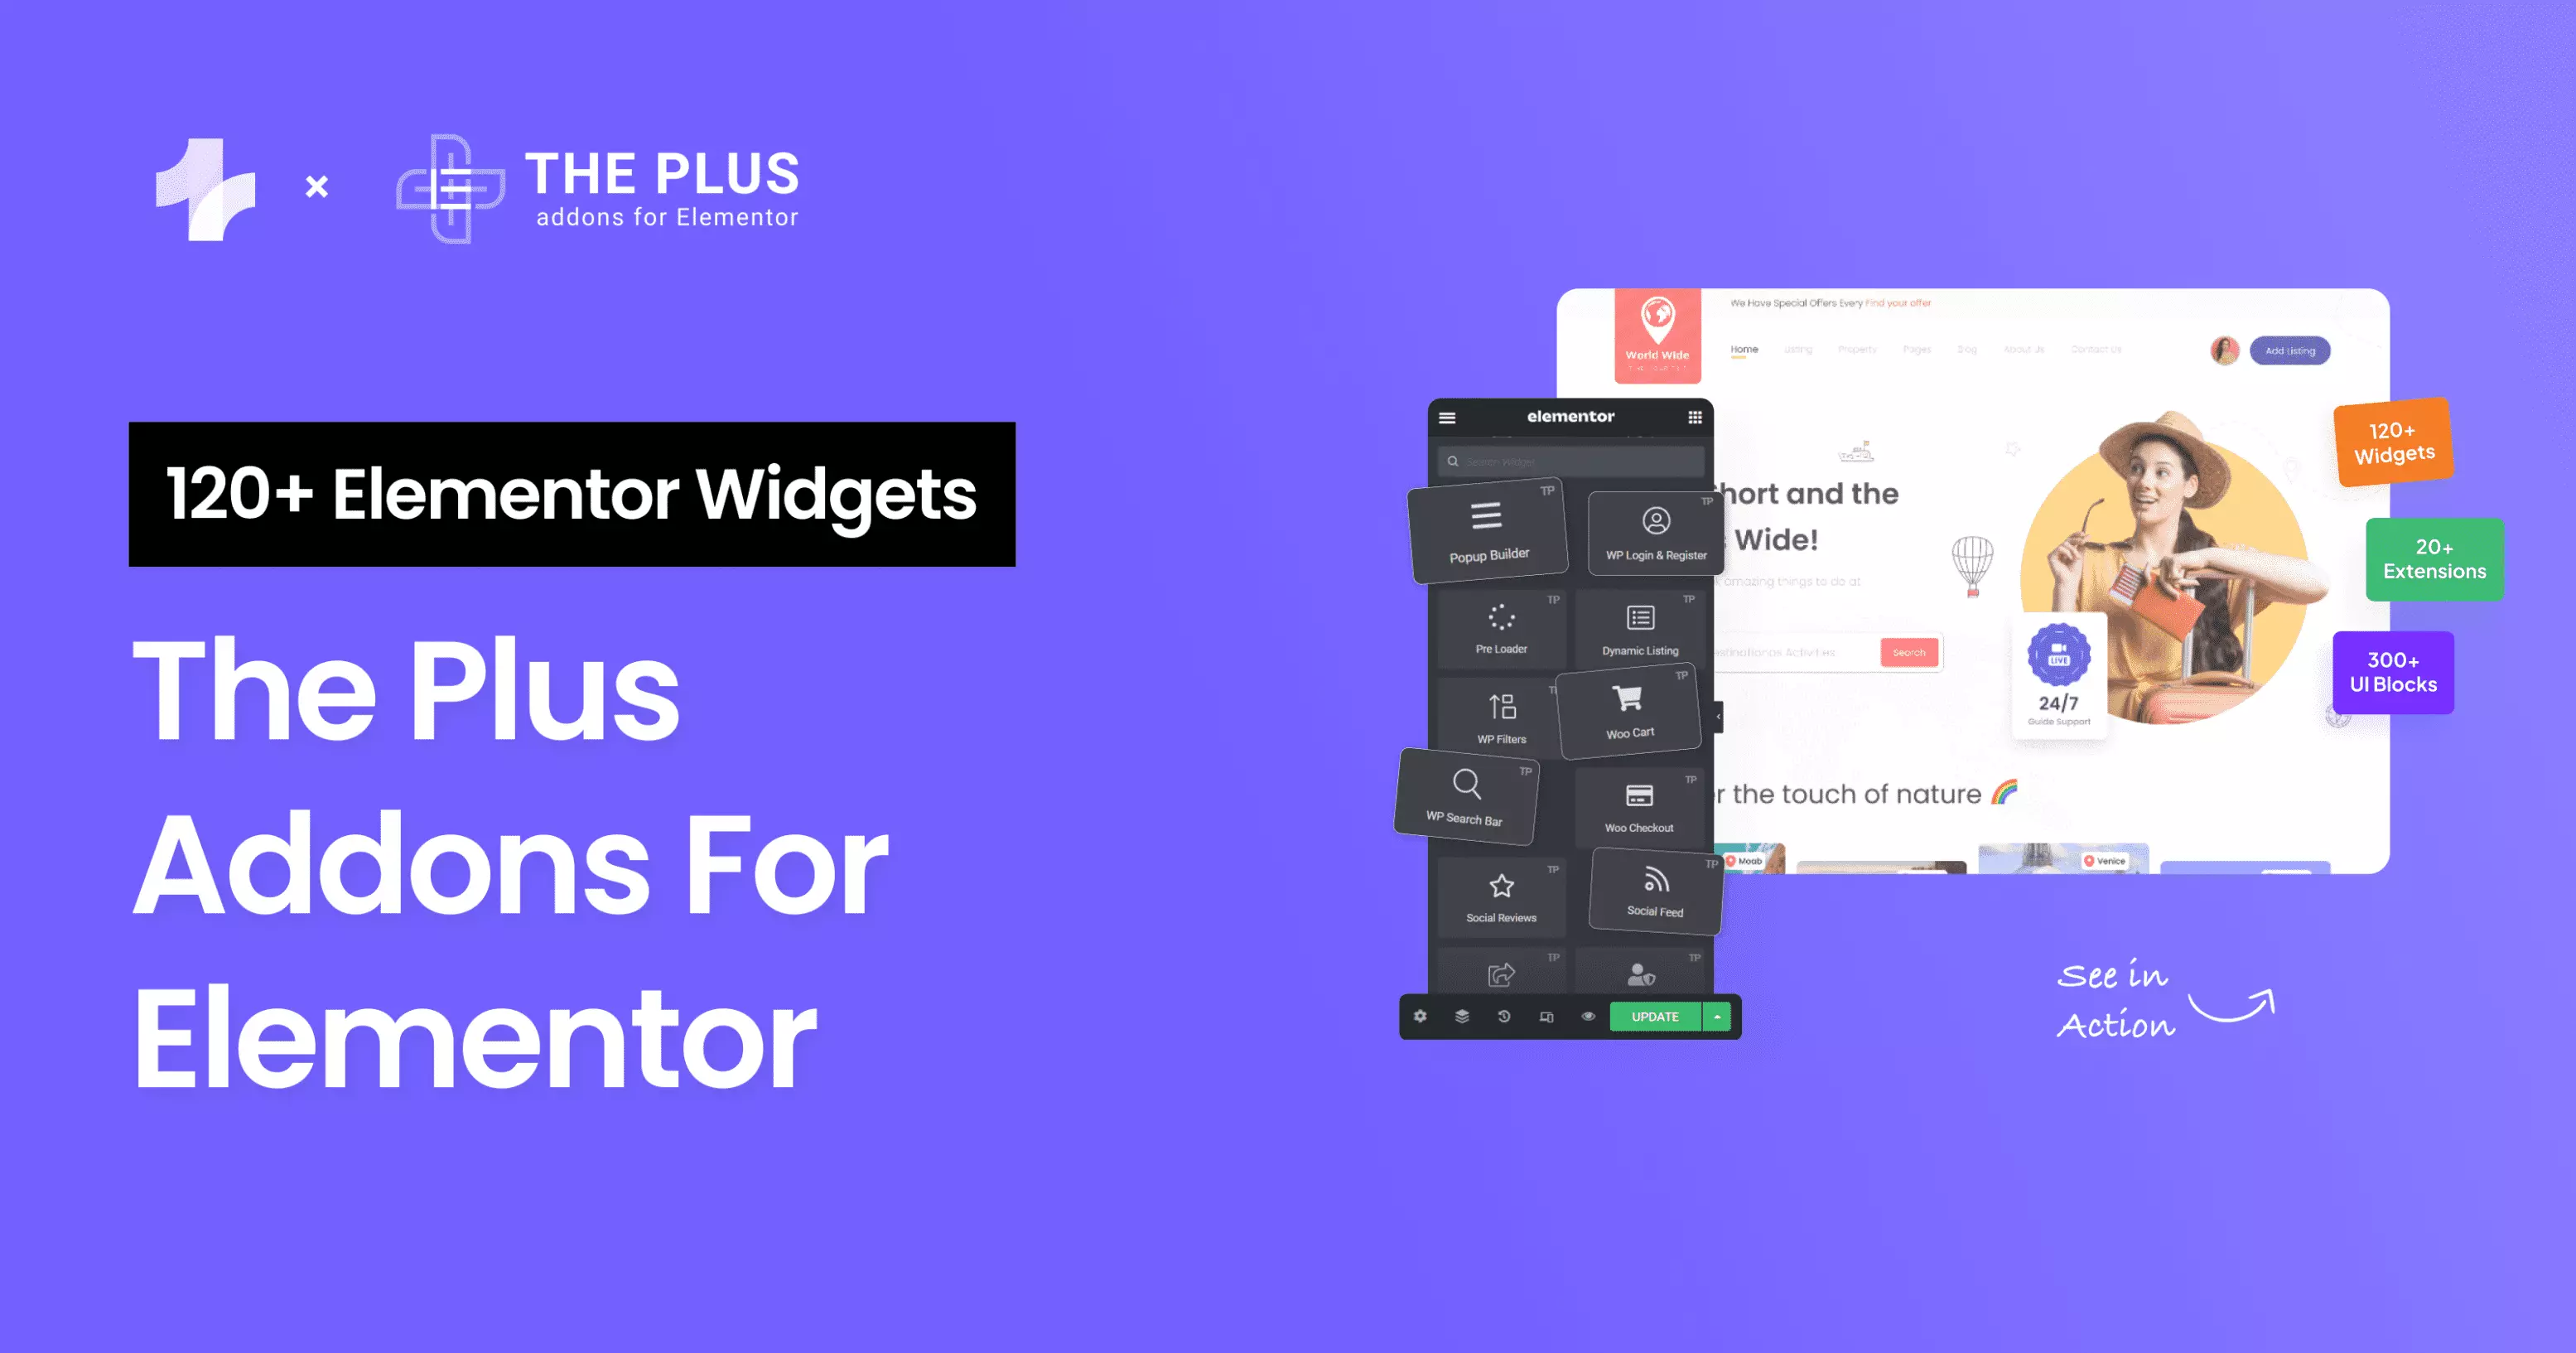 The Plus Addons For Elementor from The Plus Addons for Elementor